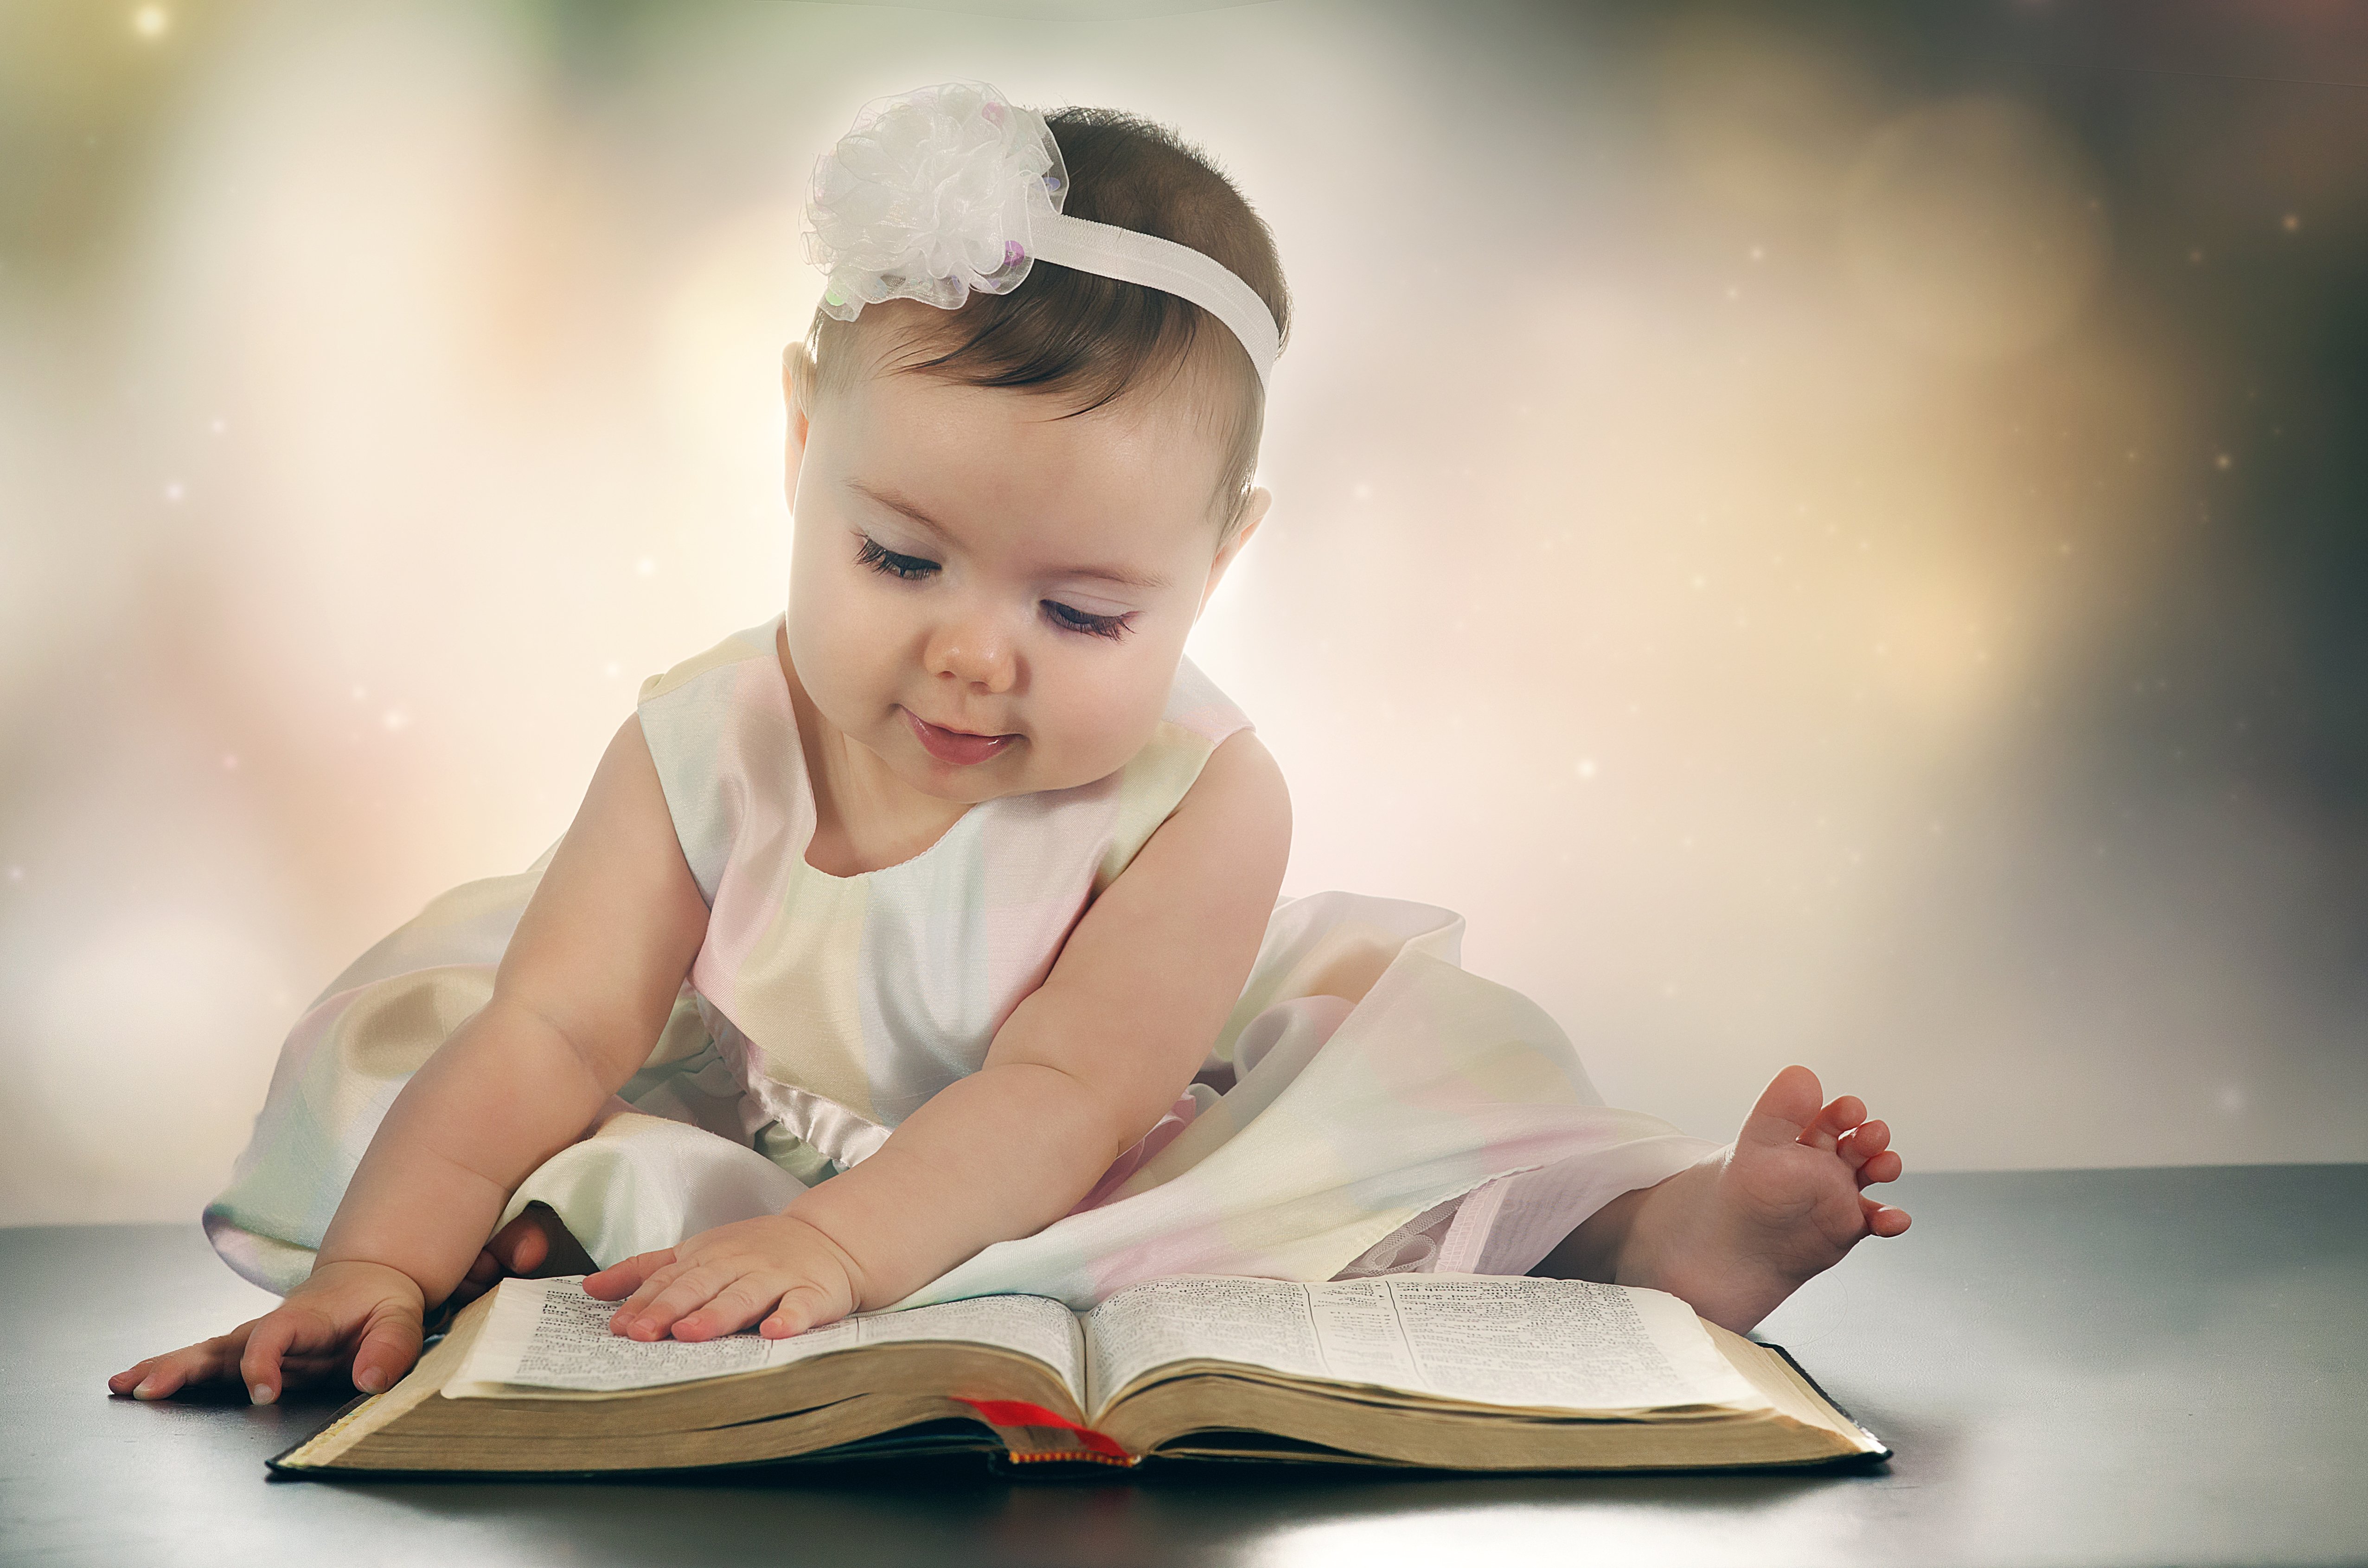 50 Christian Baby Girl Names That You’ll Be Proud To Give Your Daughter